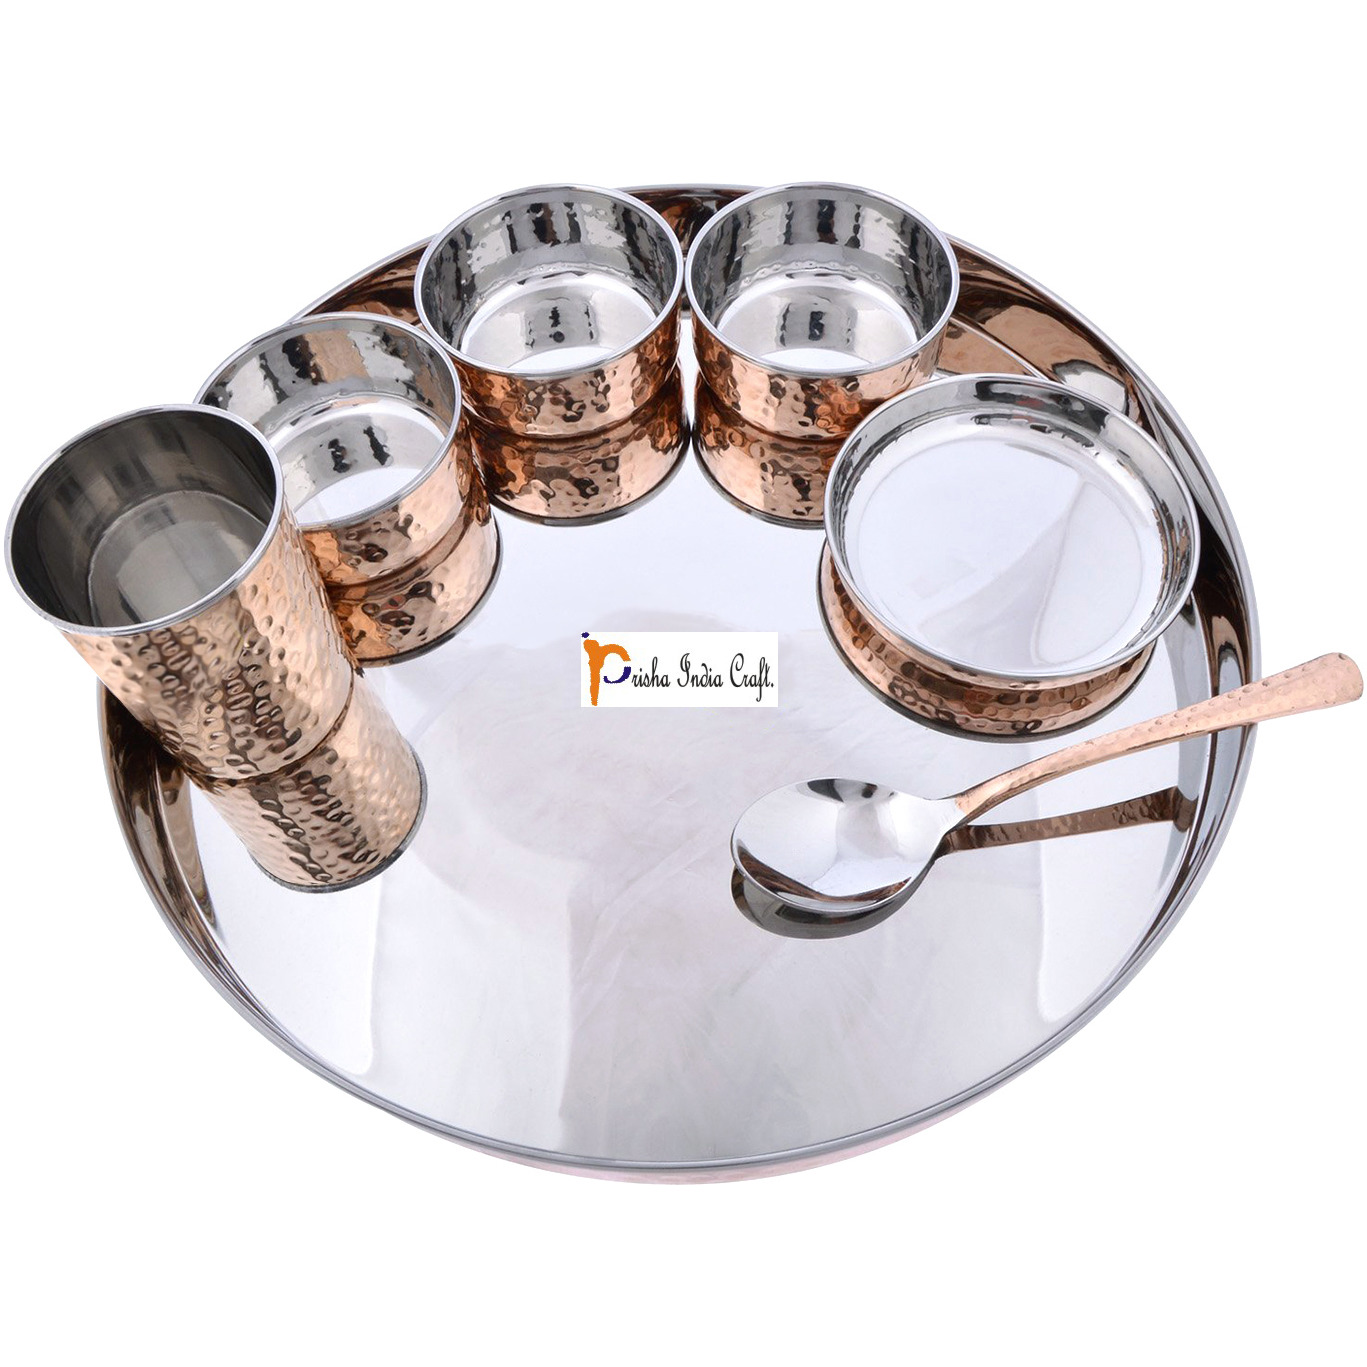 Prisha India Craft B. Set of 5 Dinnerware Traditional Stainless Steel Copper Dinner Set of Thali Plate, Bowls, Glass and Spoon, Dia 13  With 1 Luxury Style Pitcher Jug - Christmas Gift